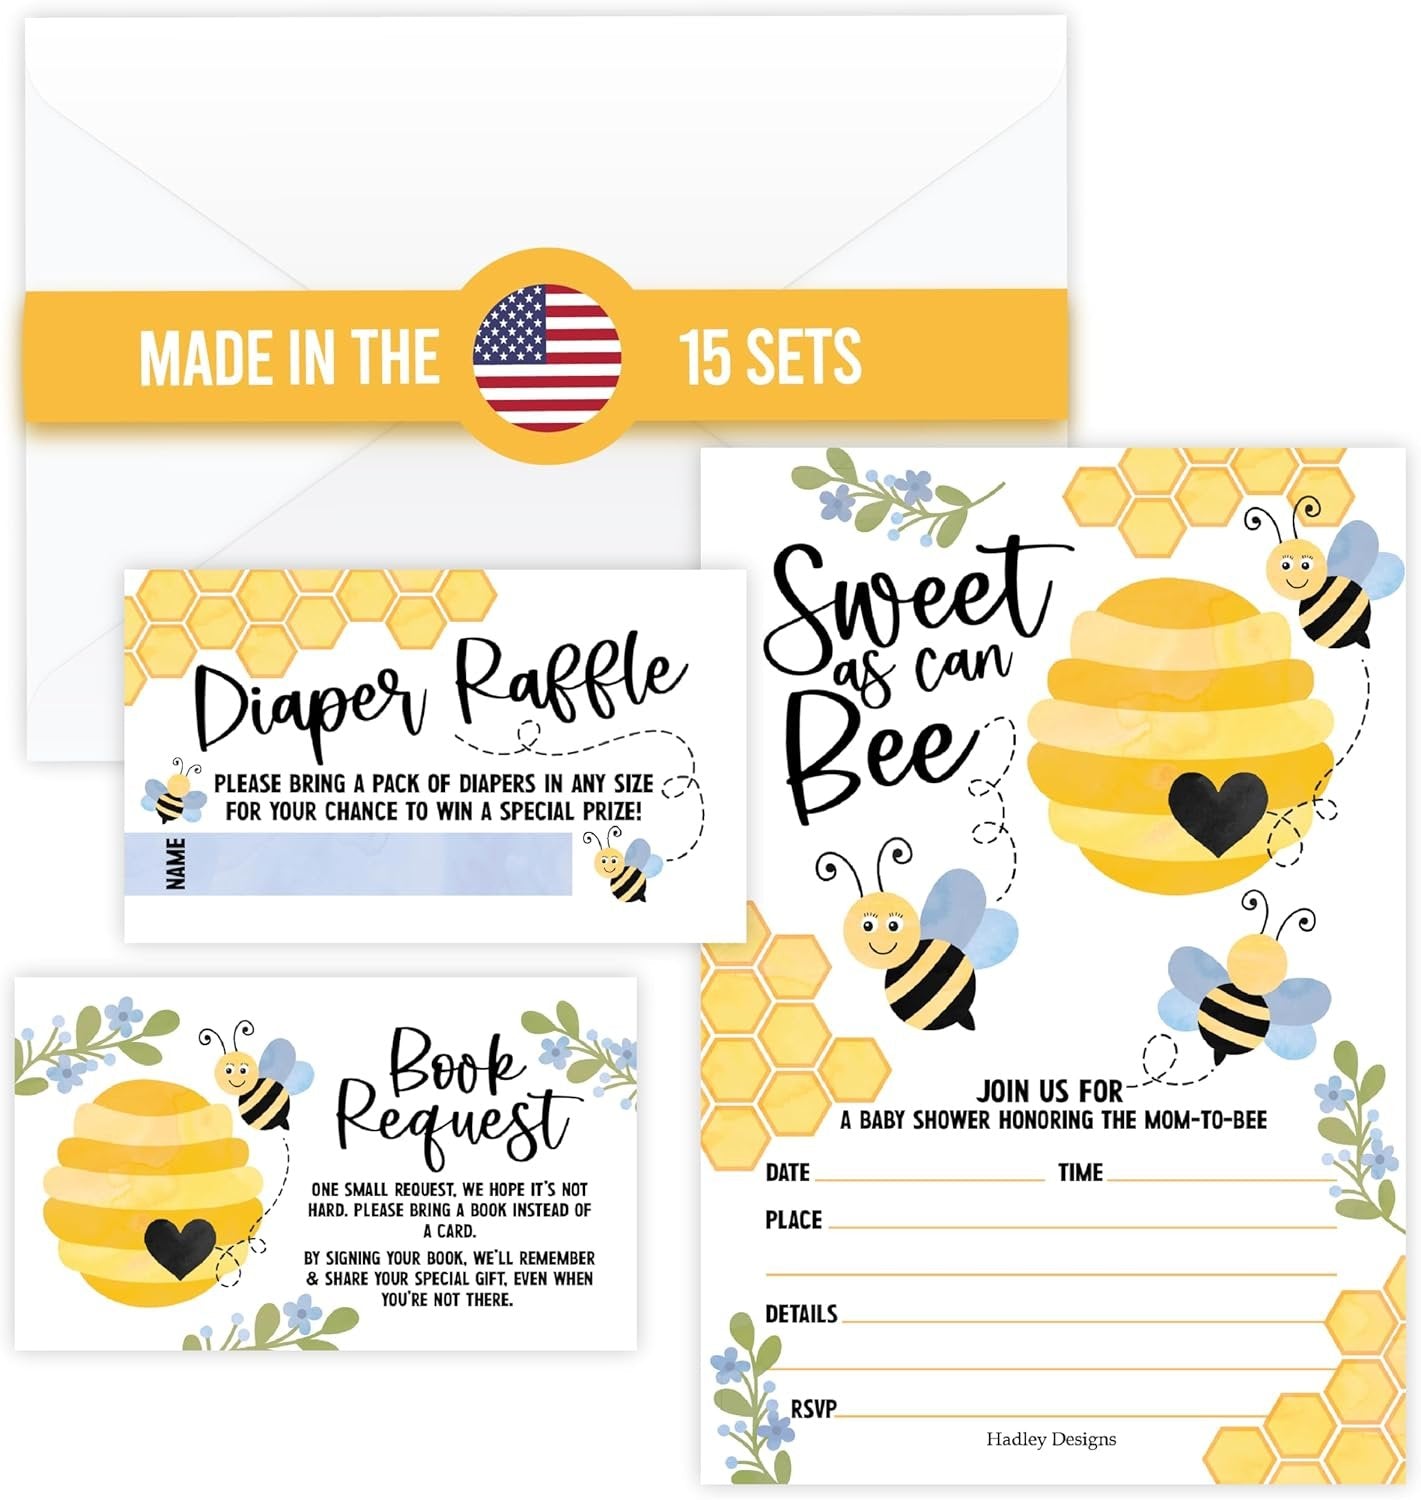 Baby Shower Invitations Shop by Theme | Bees